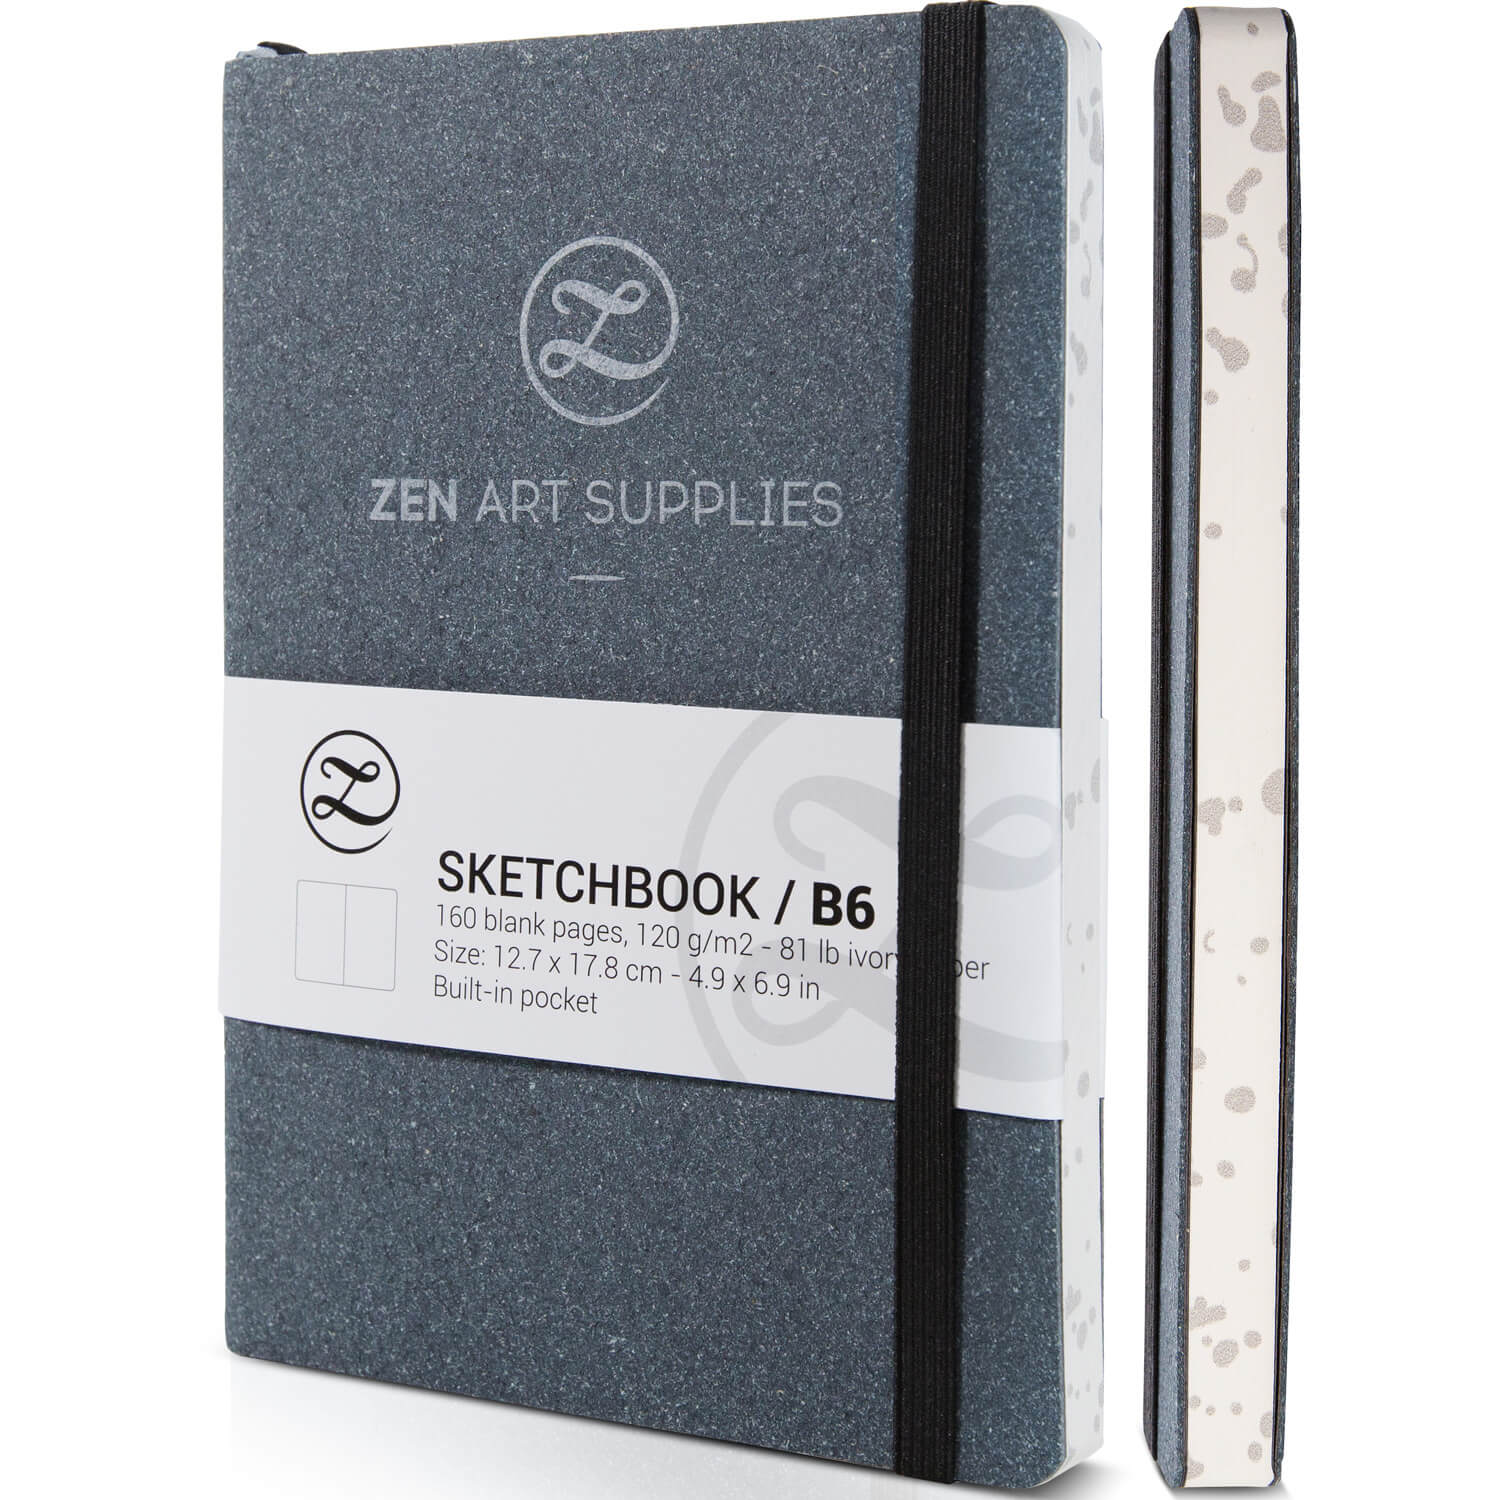 Just My Style Ultimate Sketchbook Kit, 80-pages Total